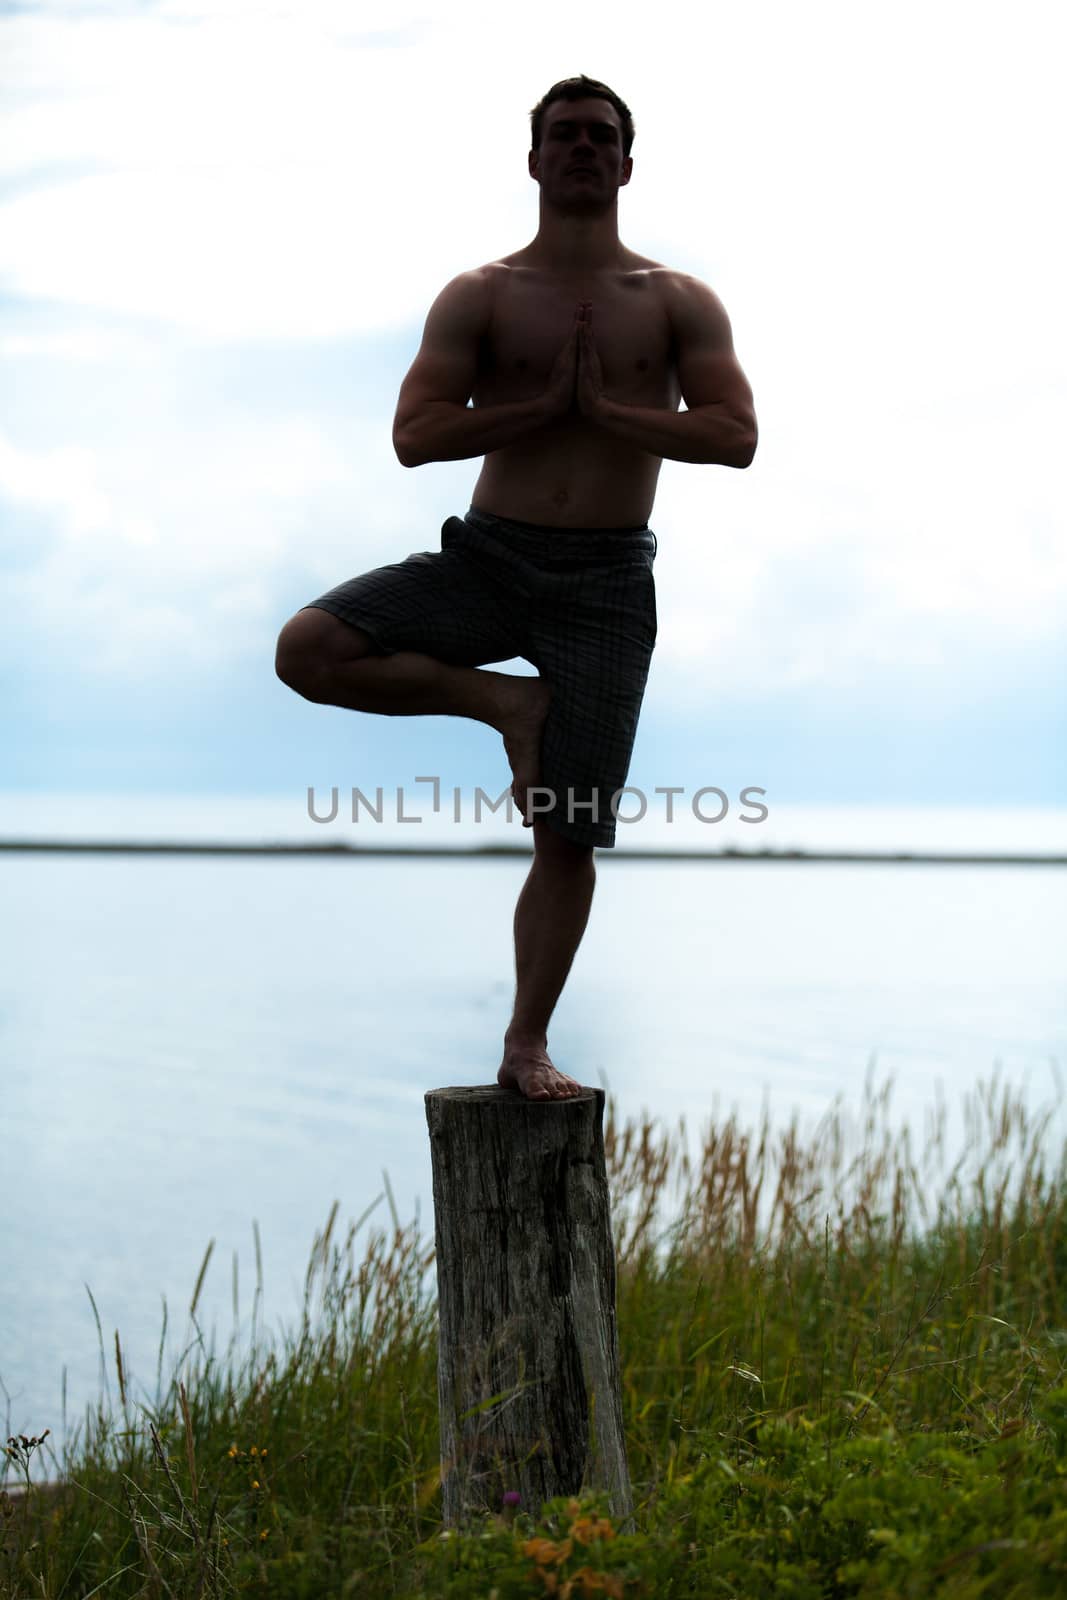 Young Adult in Silhouette Doing the Tadasana (Tree) position in Yoga on a Stump in Nature